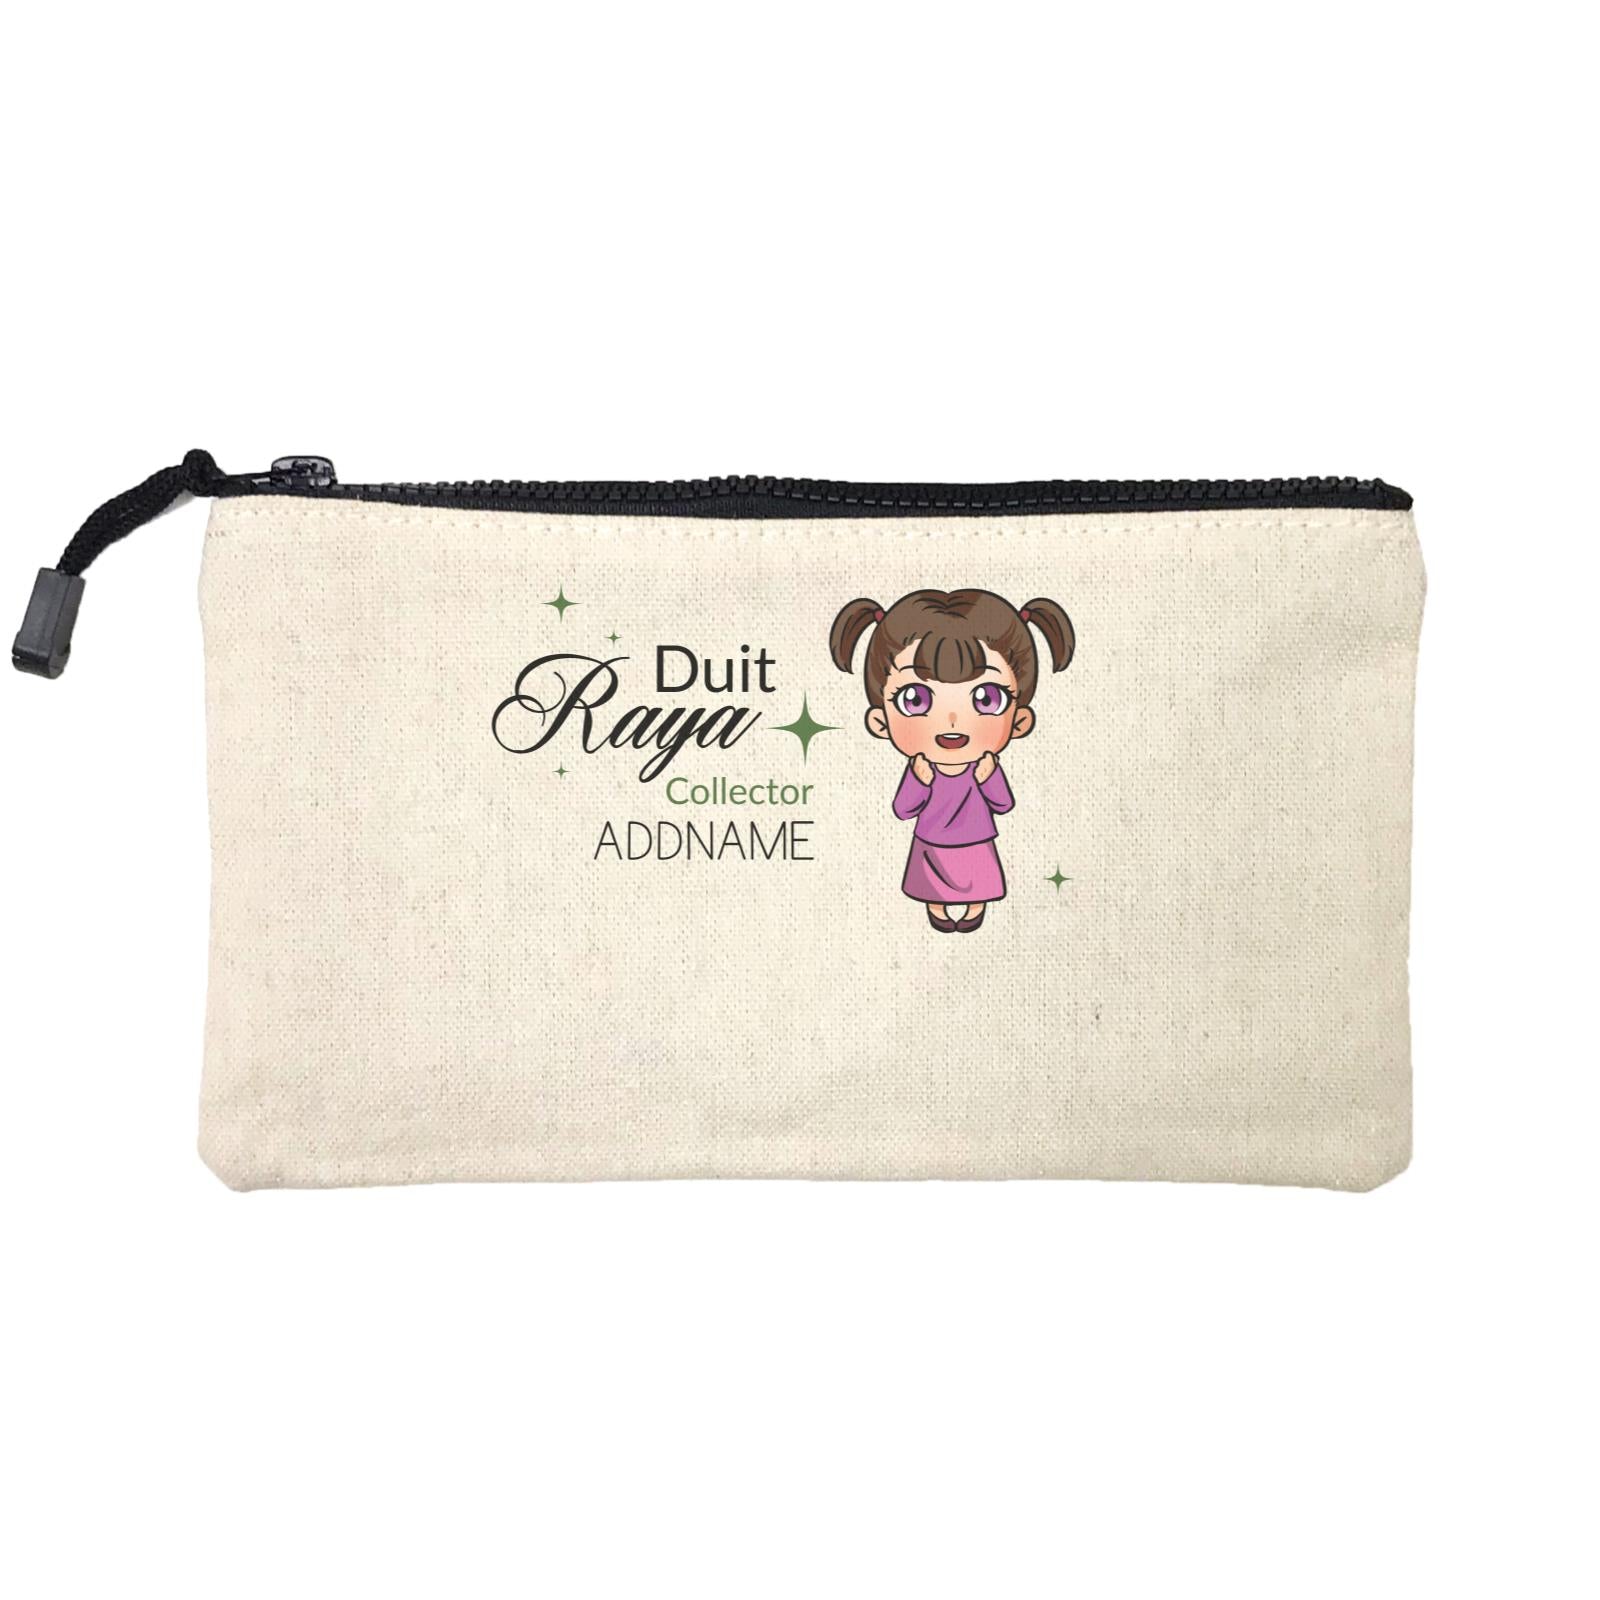 Raya Chibi Little Girl Duit Raya Collector Addname Mini Accessories Stationery Pouch